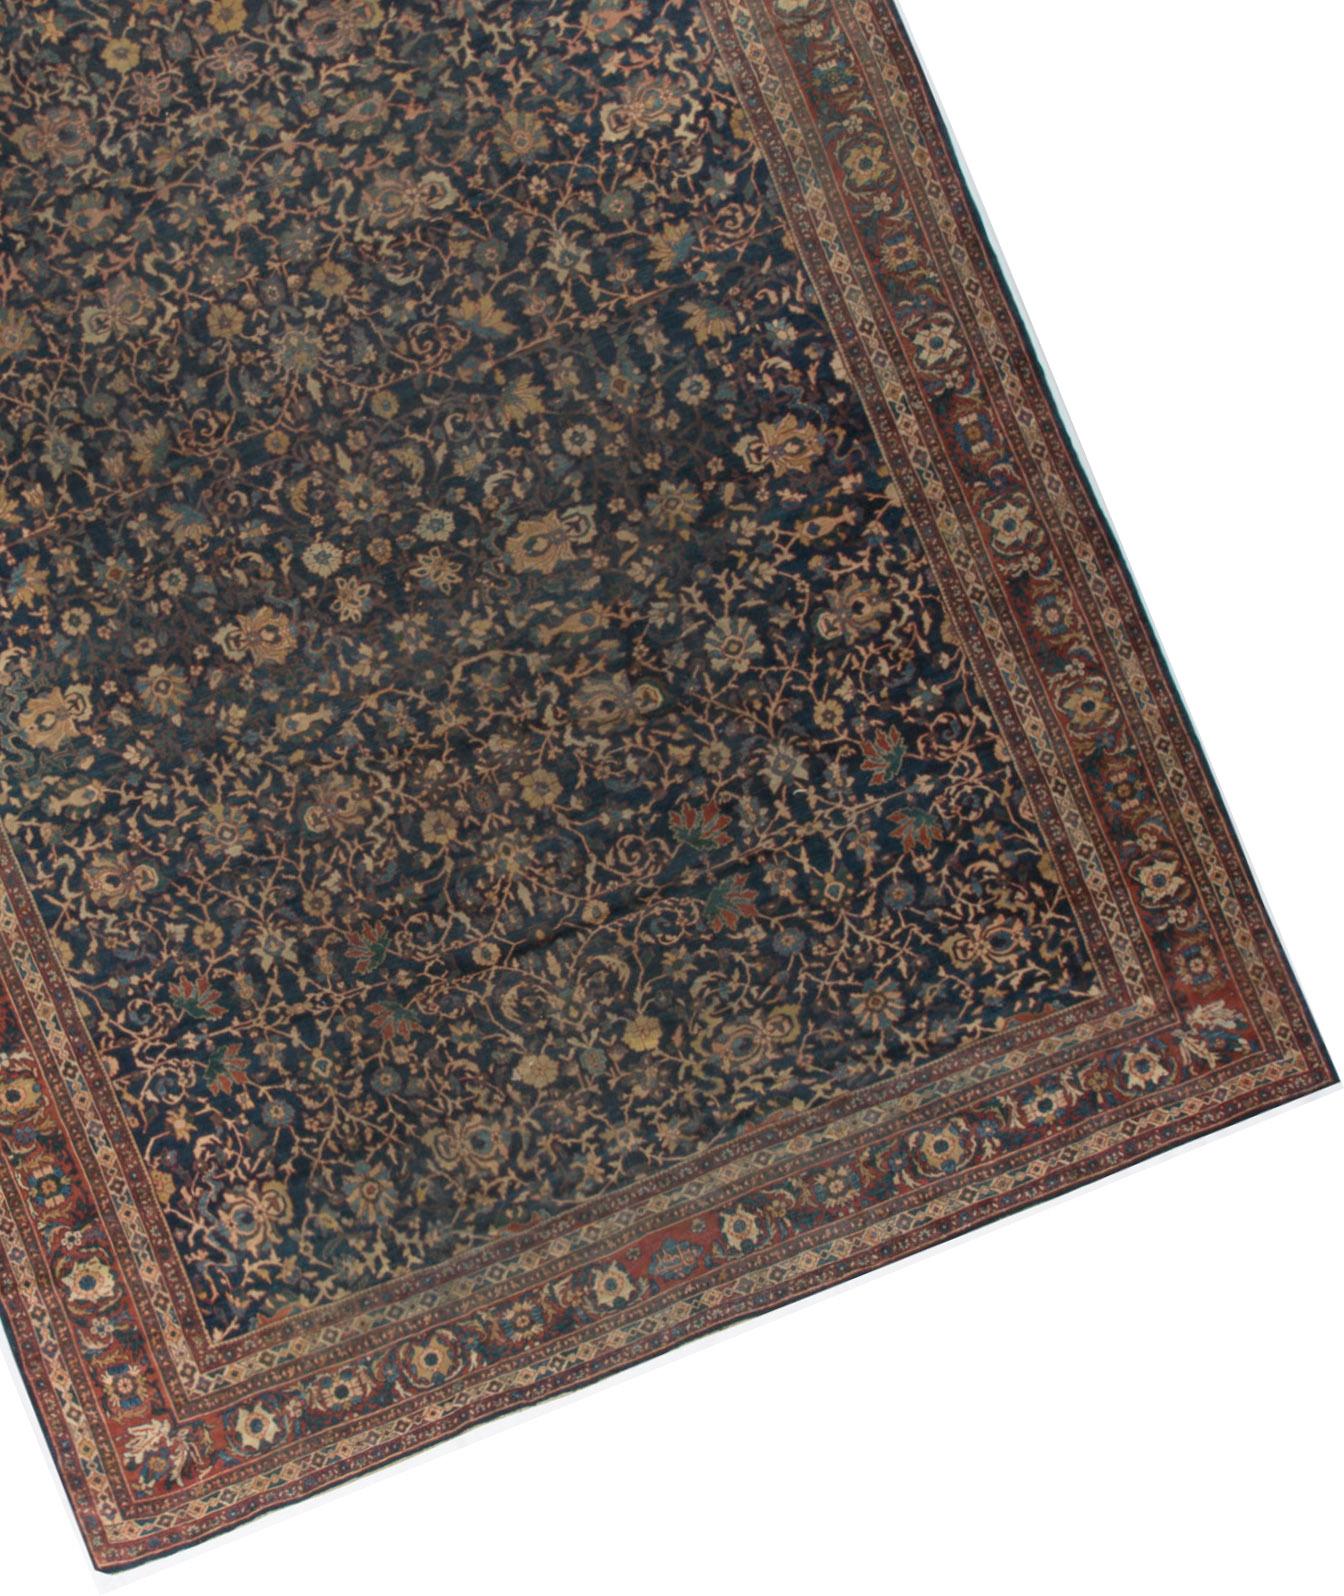 Antique Persian Kashan rug, circa 1900 with a magnificent allover arabesque design coupled with the simple and more spacious main border helps create an antique rug that will bring a sense of style and importance to any room setting. Size:12'3 x